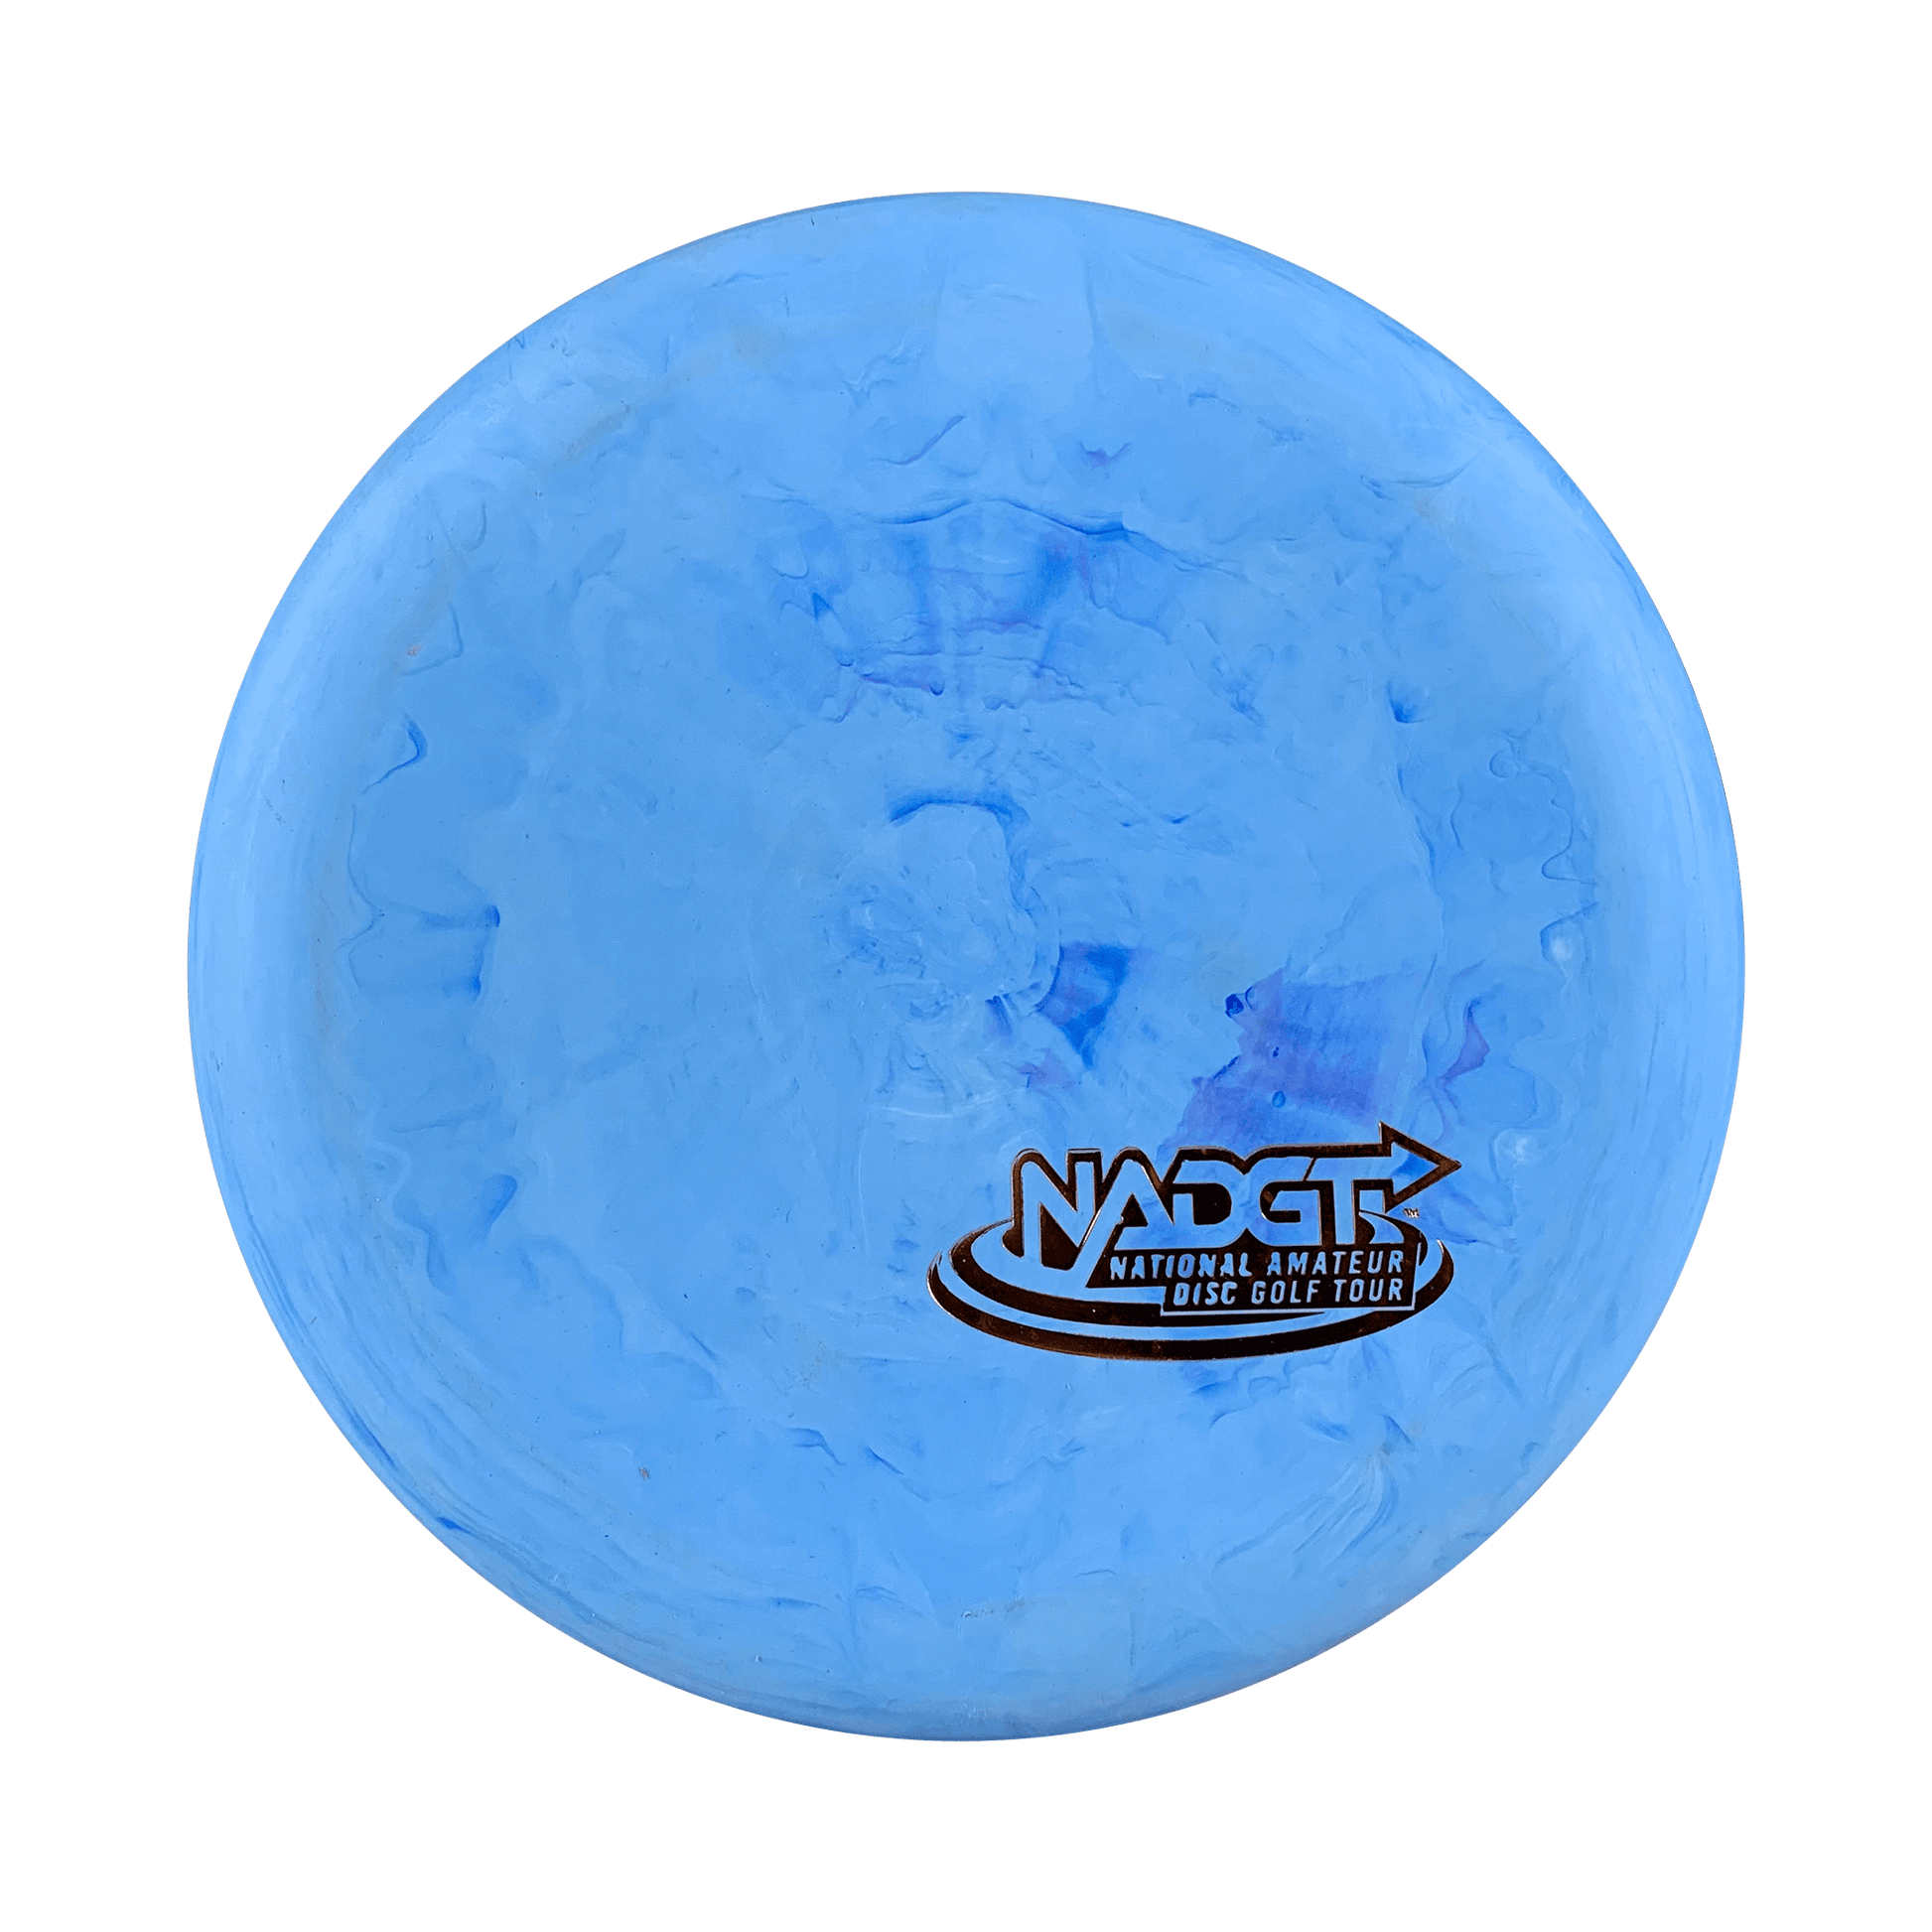 Firm Voodoo - Small NADGT Stamp Disc Gateway multi / blue 175 